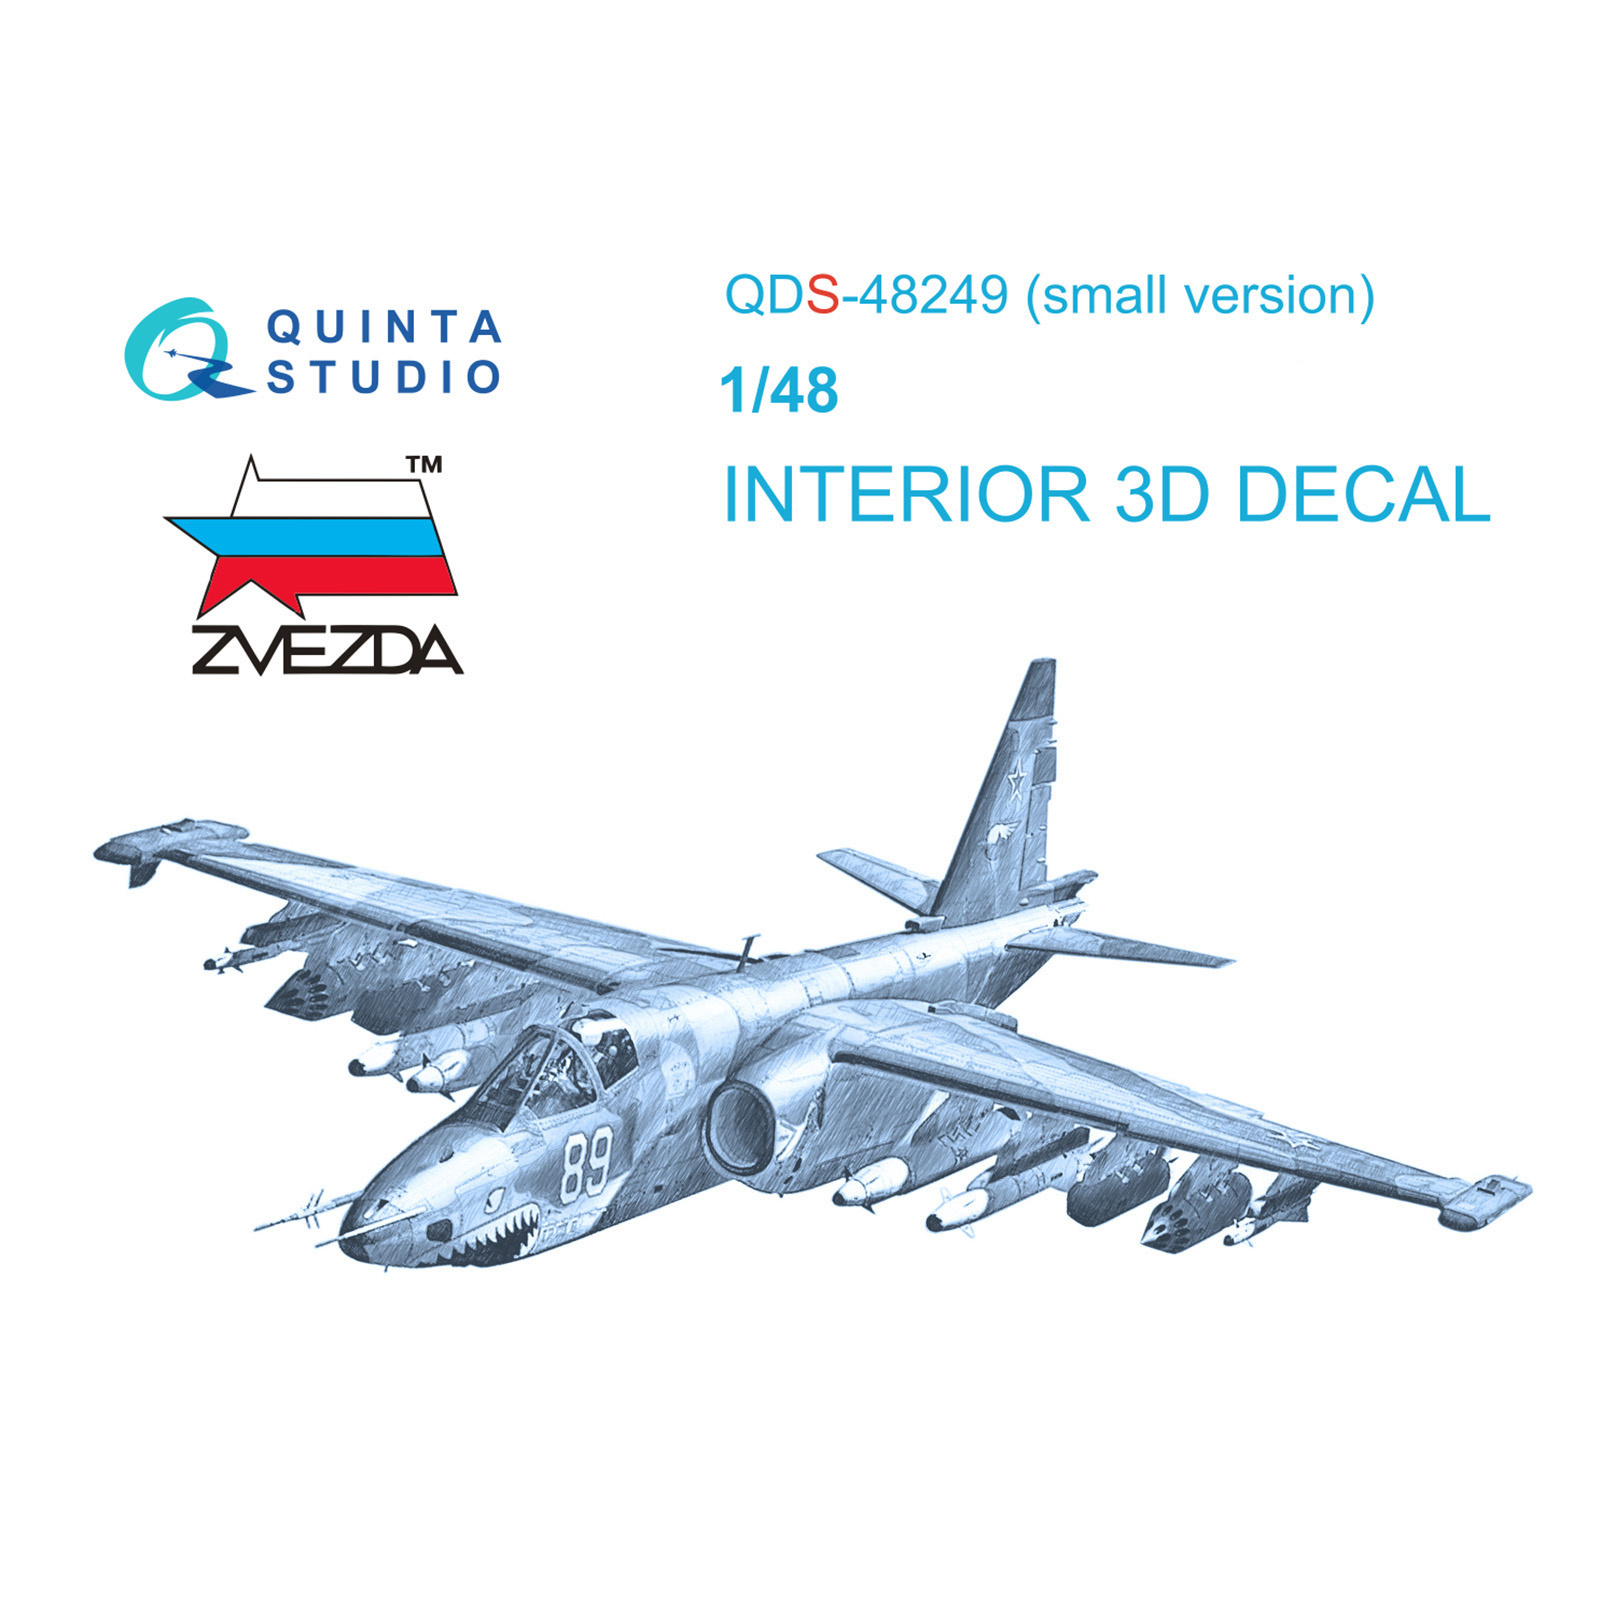 QDS-48249 Quinta Studio 1/48 3D dashboard decal for the model Soviet Sukhhoy-25 attack aircraft of the Zvezda company